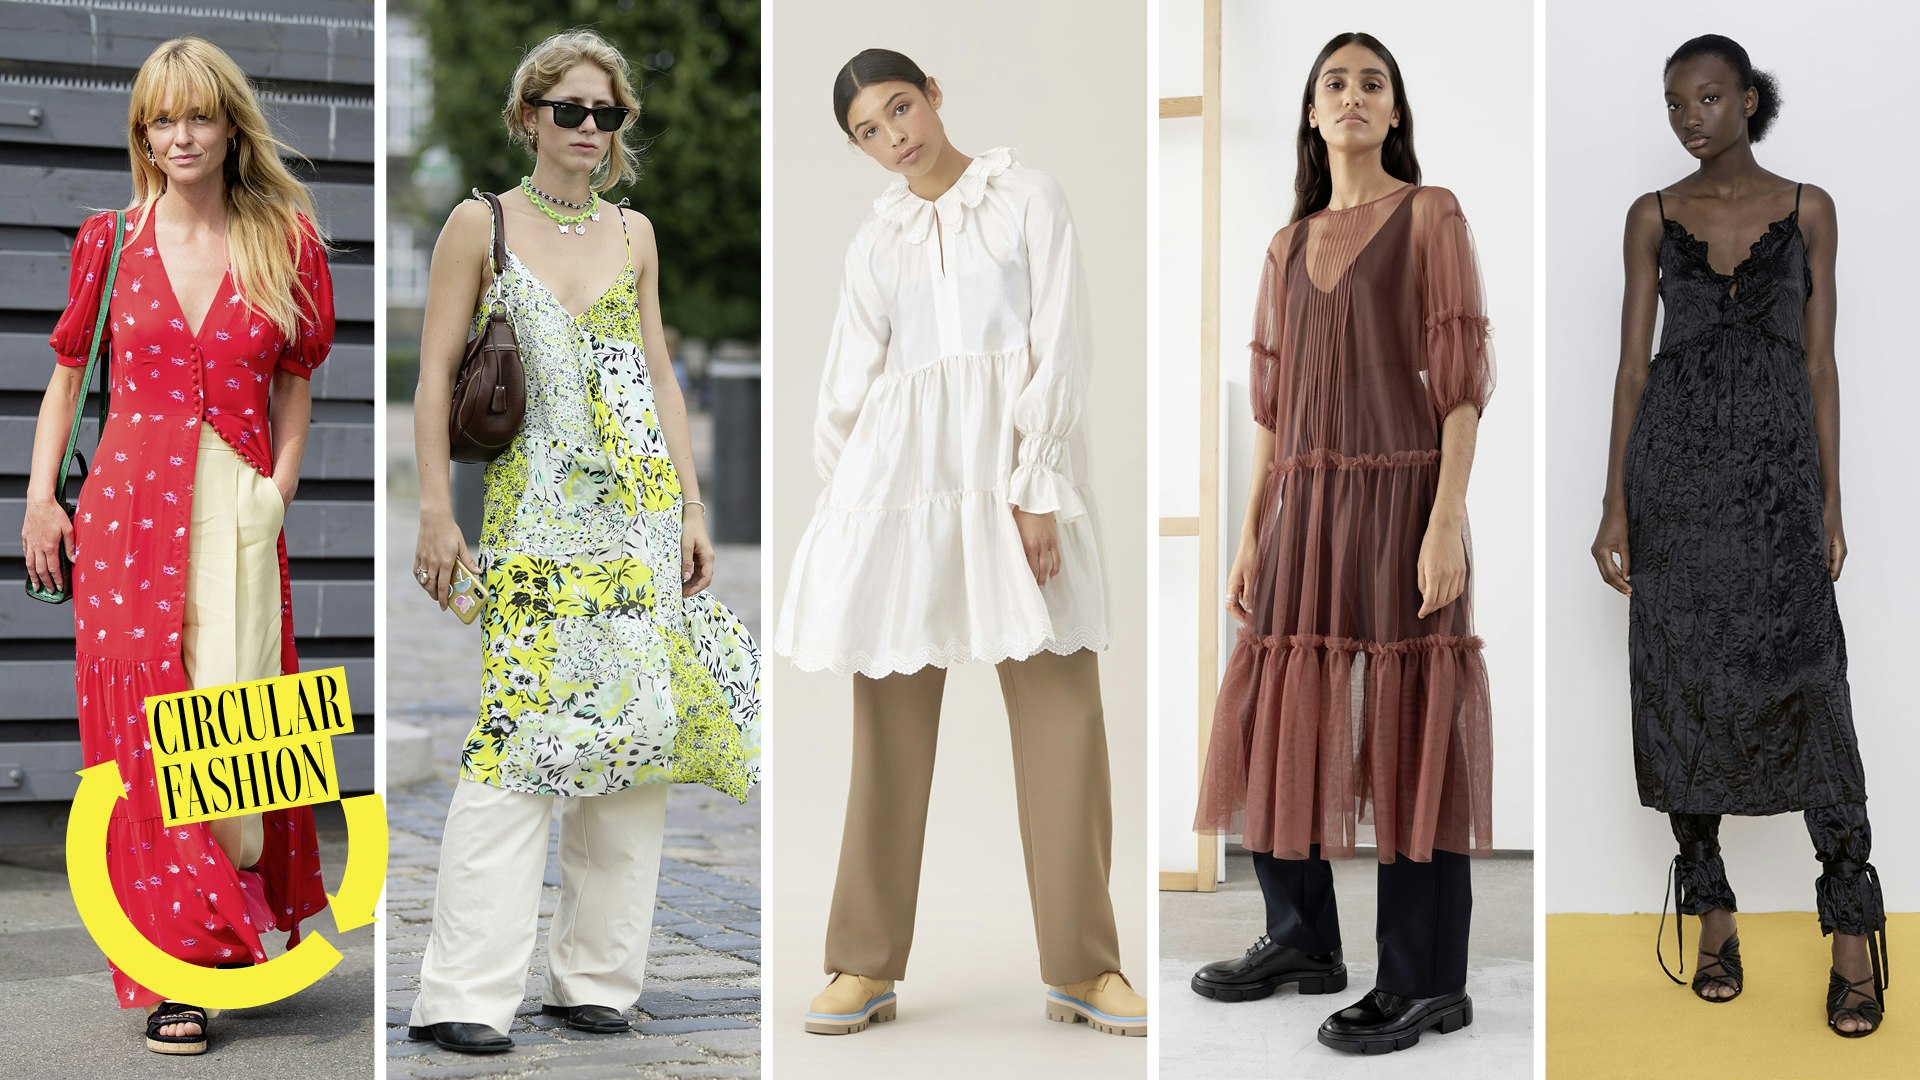 How To Wear Dresses Over Trousers For 2019 | Fashion | Grazia